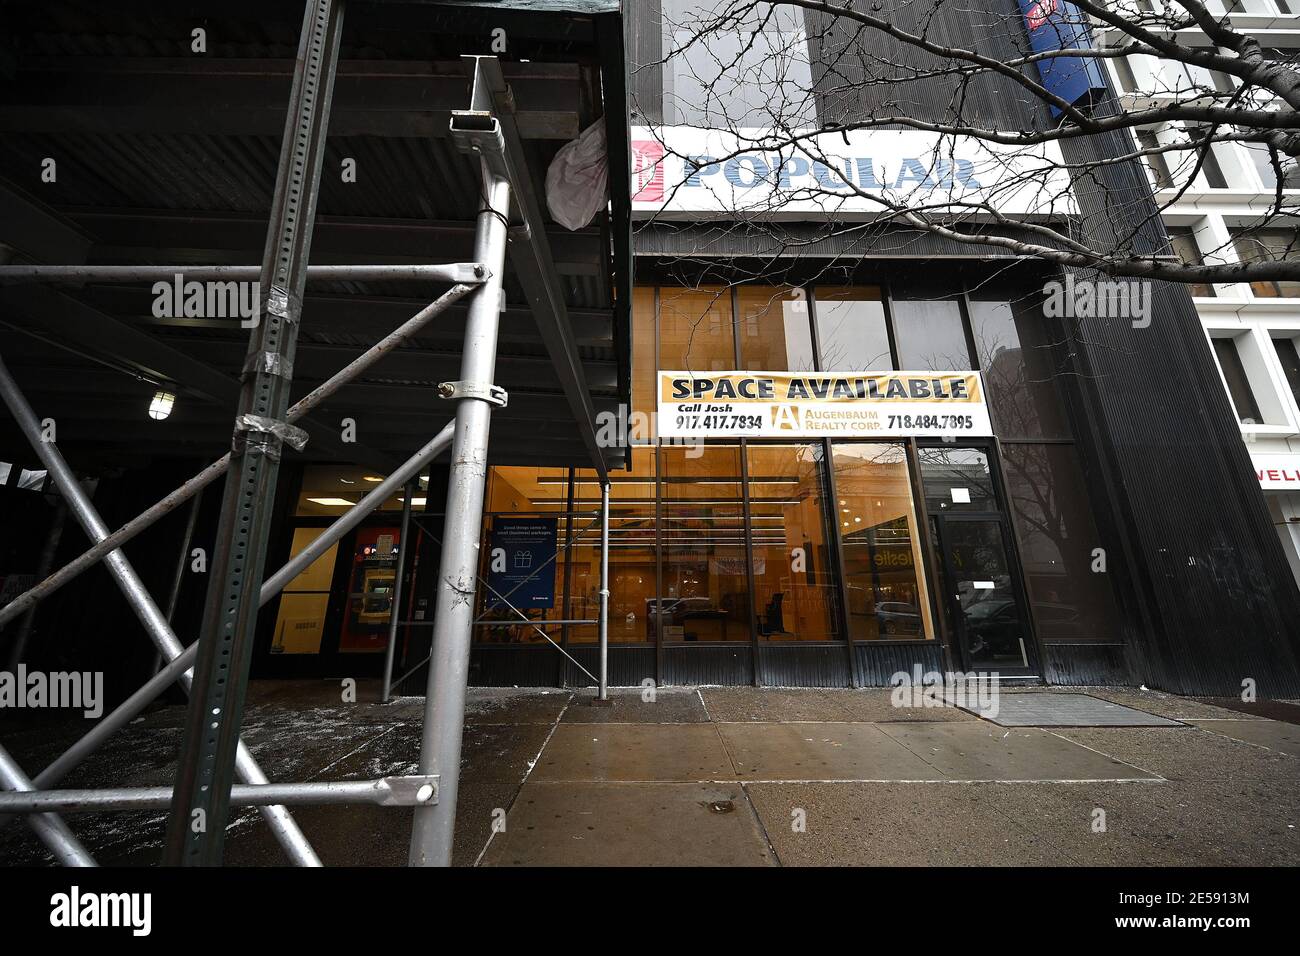 New York, USA. 26th Jan, 2021. Exterior view of a permanently closed Banco Popular bank branch along 125th Street in the Harlem neighborhood of Manhattan, New York, NY, January 26, 2021. African American communities have been disproportionately affected by COVID-19 infections at a rate of 3 times higher than white communities, impacting heavily on their business and communities. (Photo by Anthony Behar/Sipa USA) Credit: Sipa USA/Alamy Live News Stock Photo